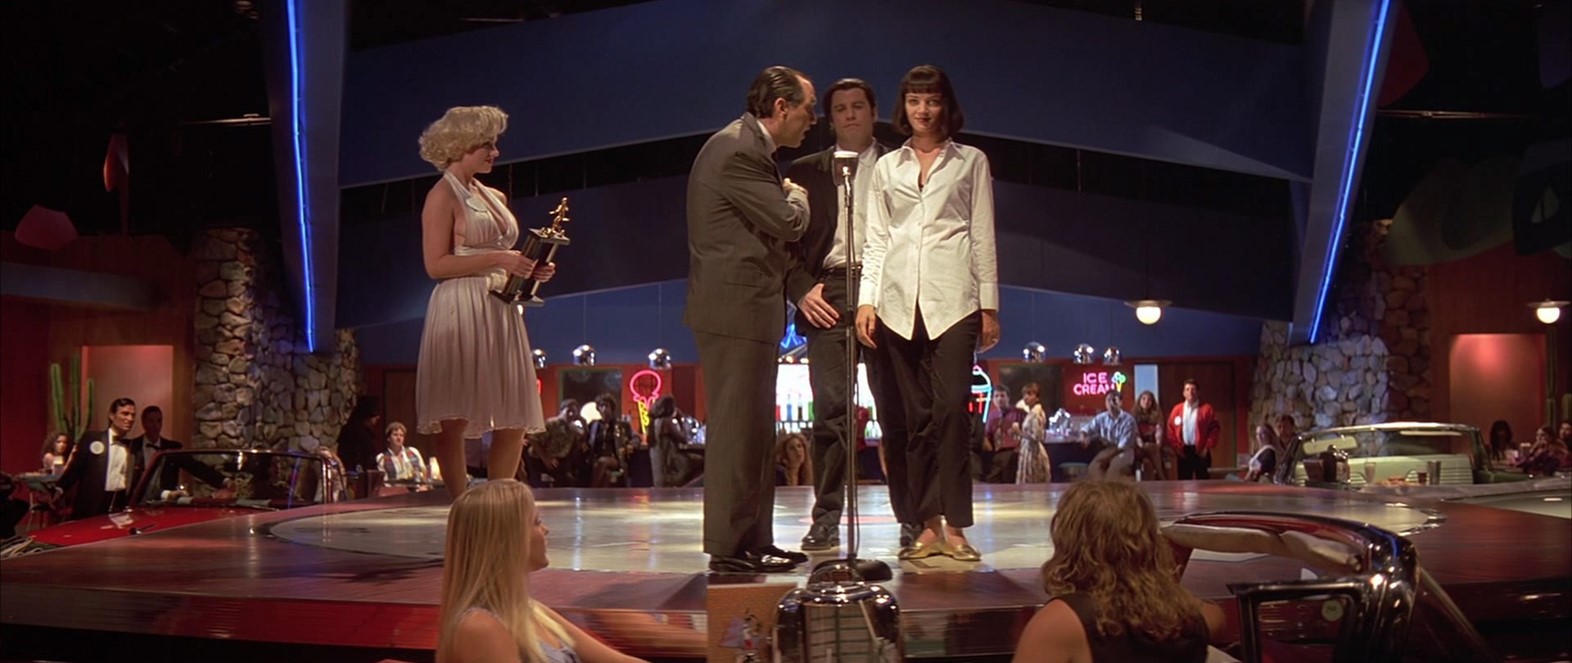 Six things you never knew about the clothes in Pulp Fiction | Dazed